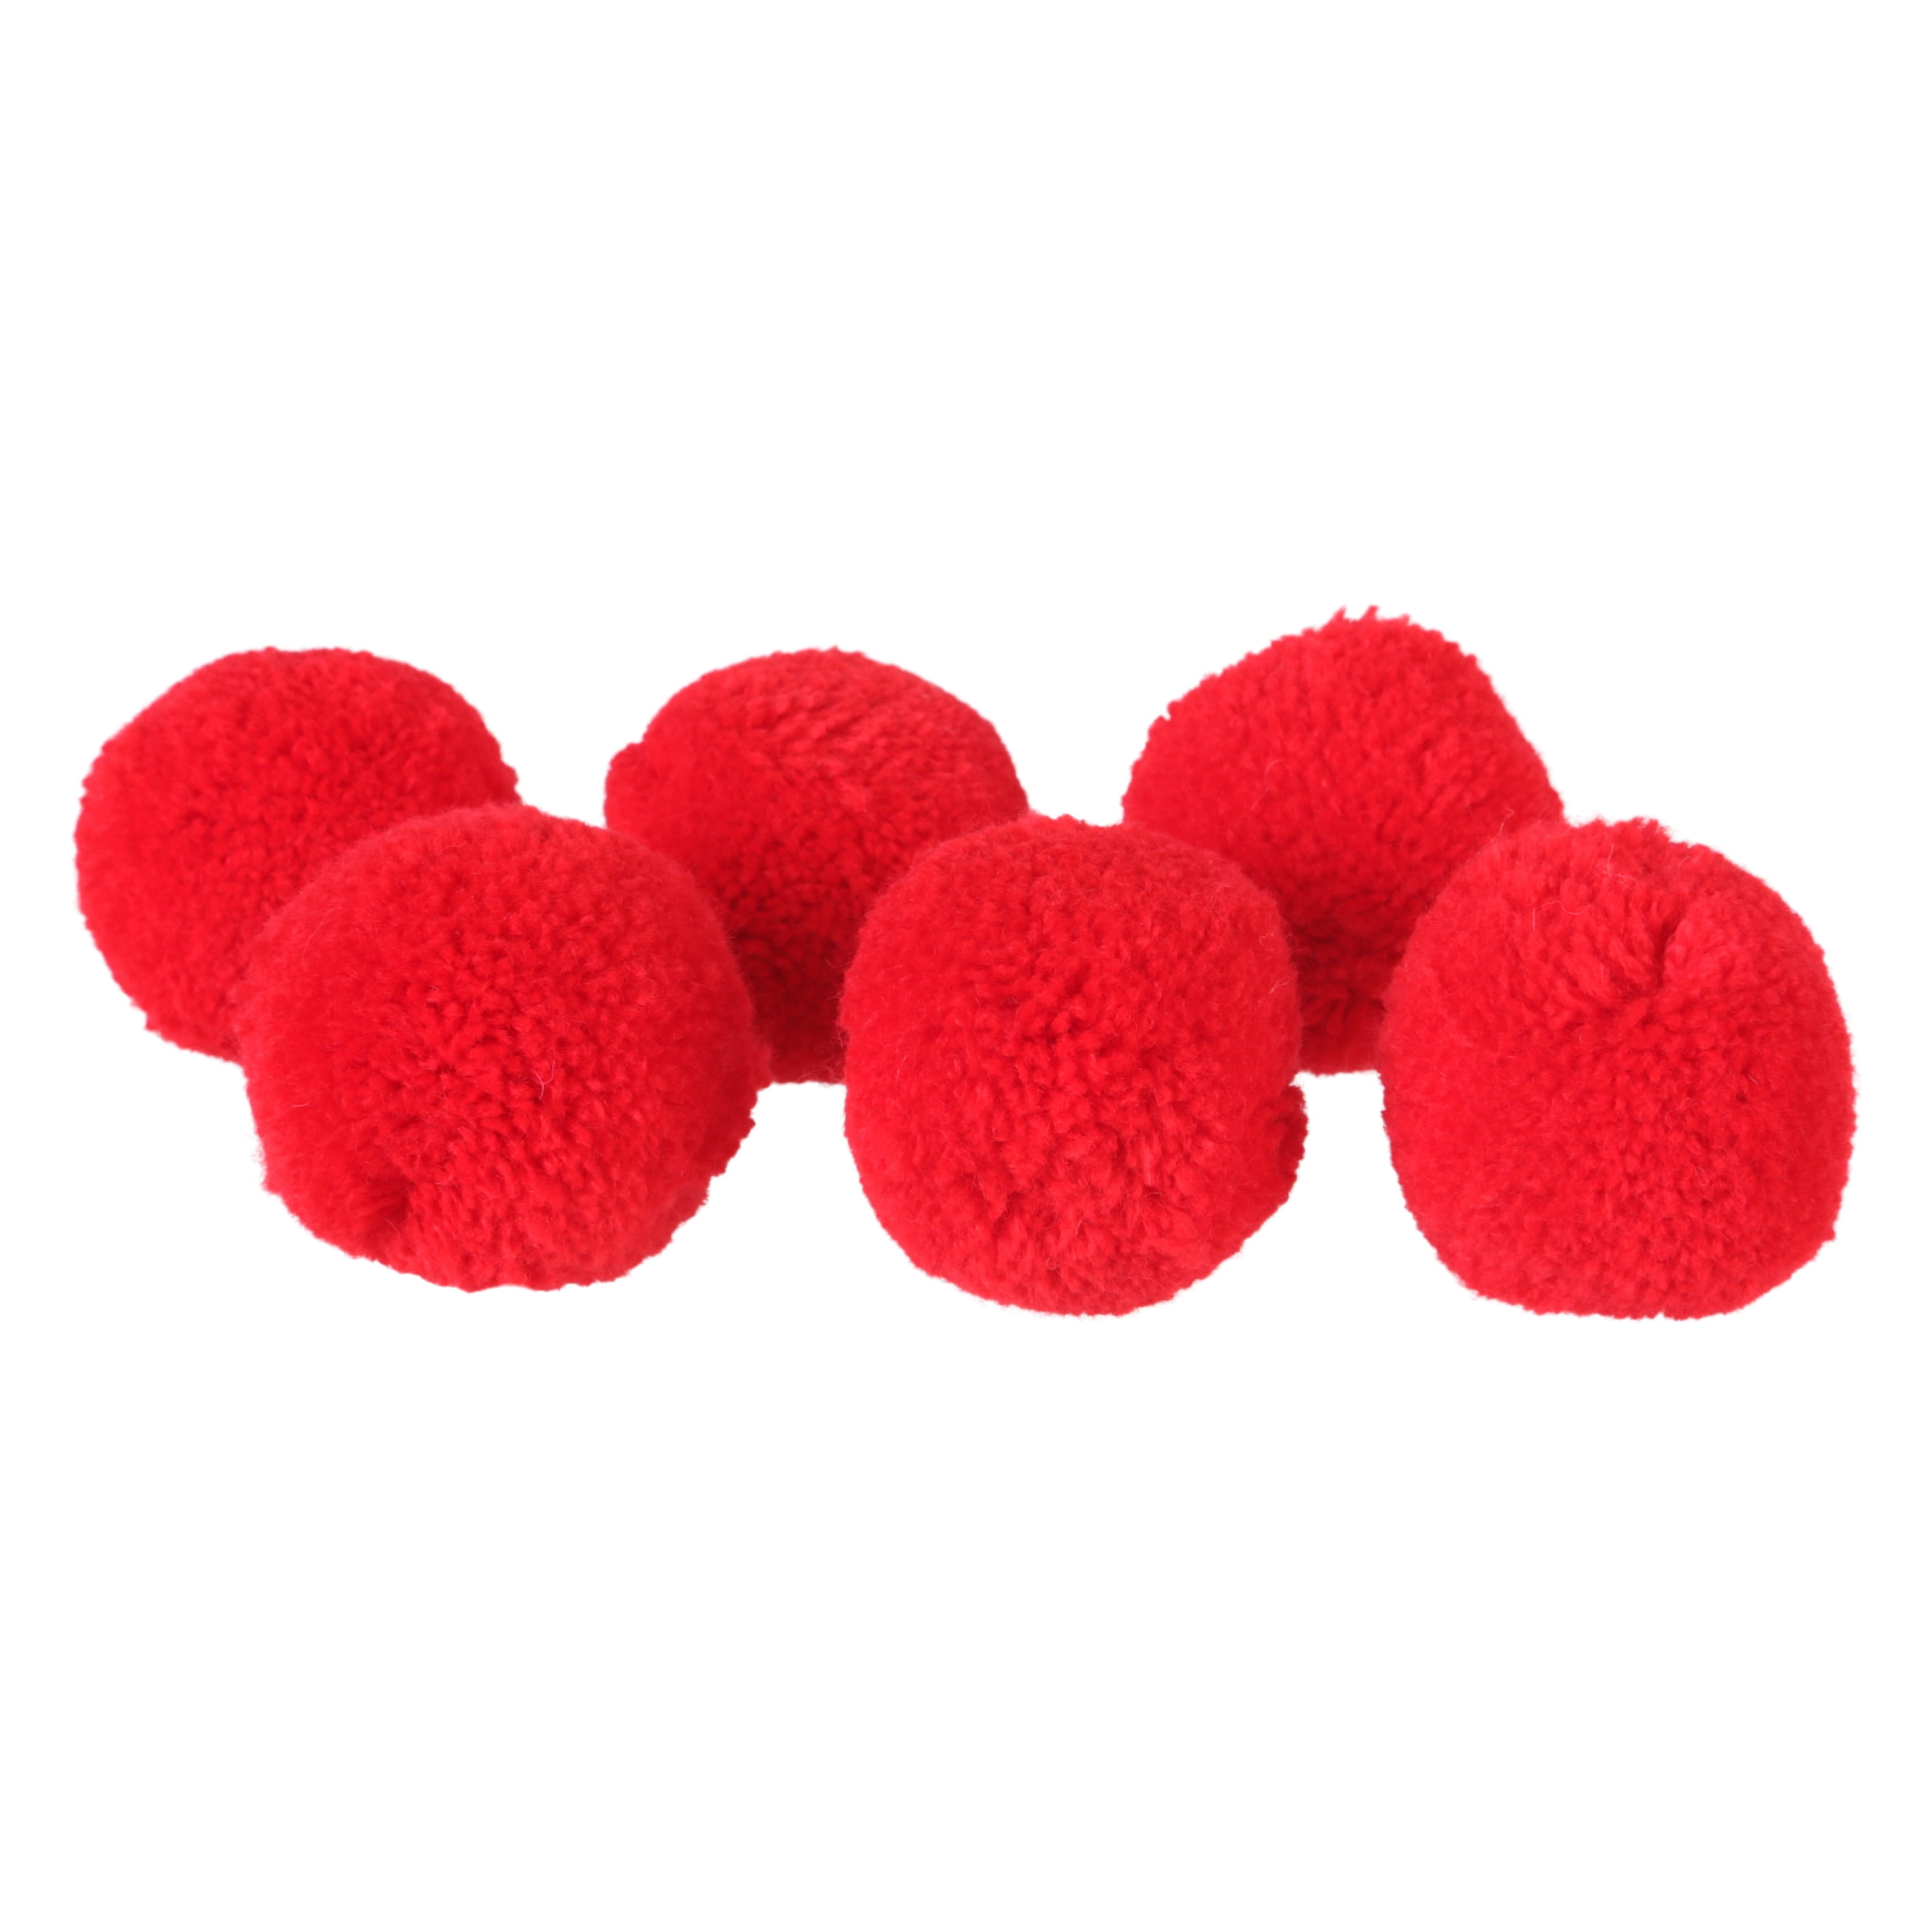 Offray Acrylic Yarn Pom Poms Great for Decorating Apparel & Creative DIY Craft Ideas - Red - 1 1/2 in